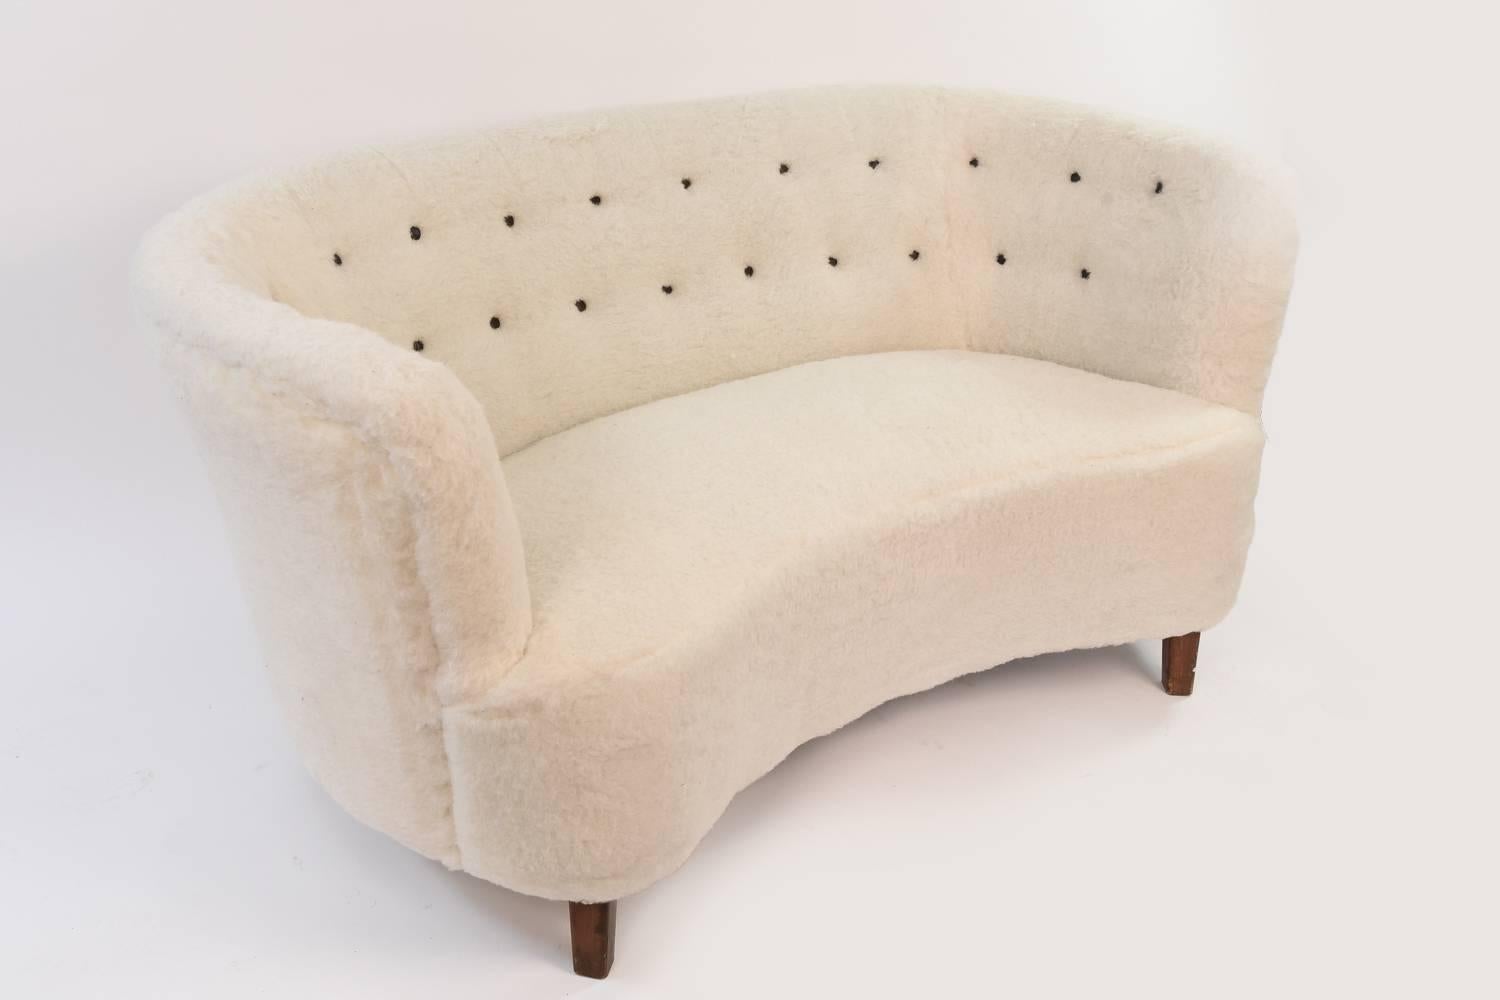 This incredible banana loveseat or two-seat sofa by Slagelse Møbelværk has been recently reupholstered in lambs wool and features a wonderful tufted backrest with contrasting black tufts. Classic, highly coveted form in exquisite upholstery.